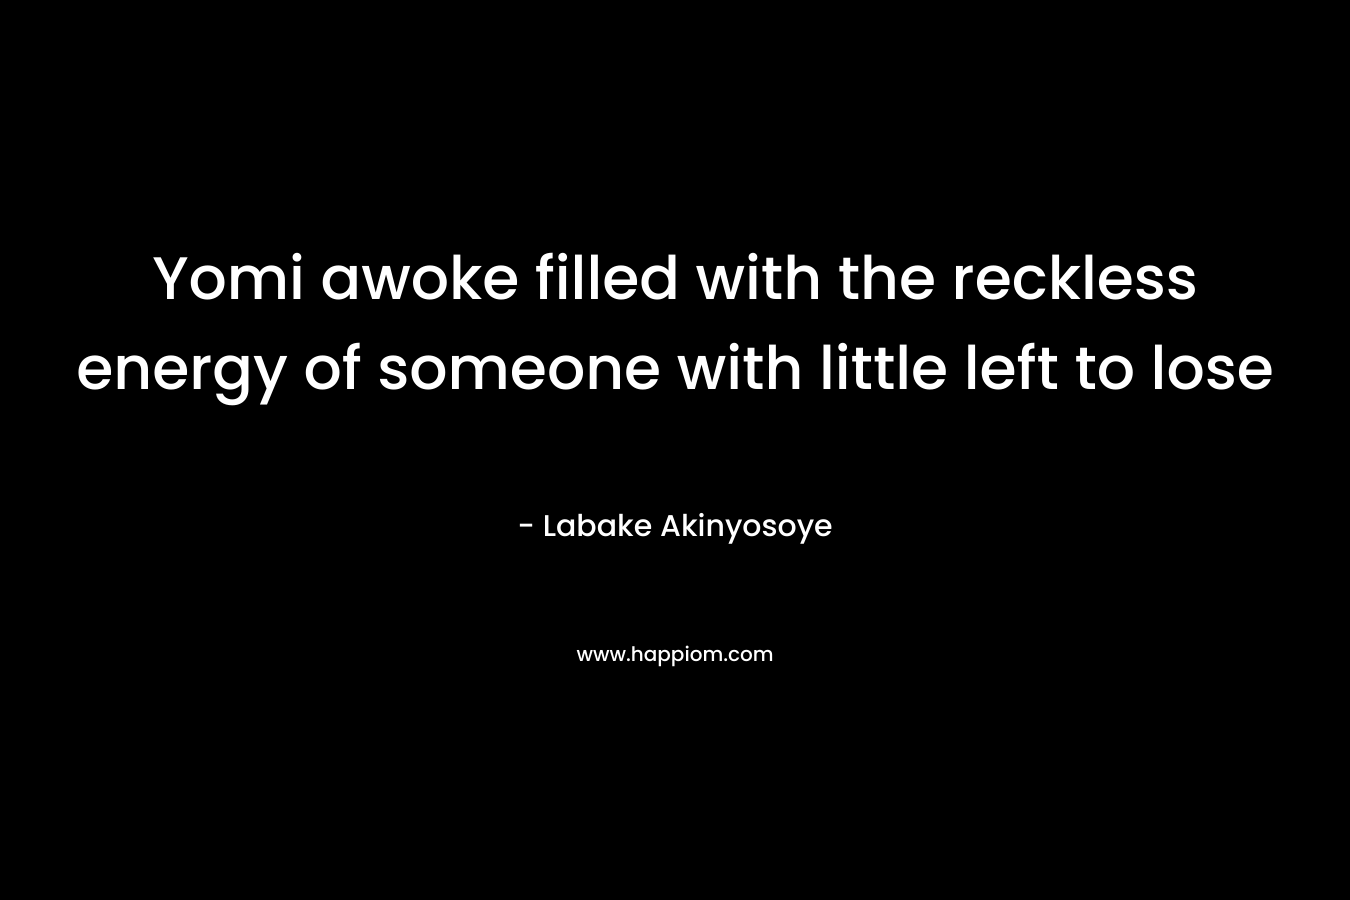 Yomi awoke filled with the reckless energy of someone with little left to lose – Labake Akinyosoye